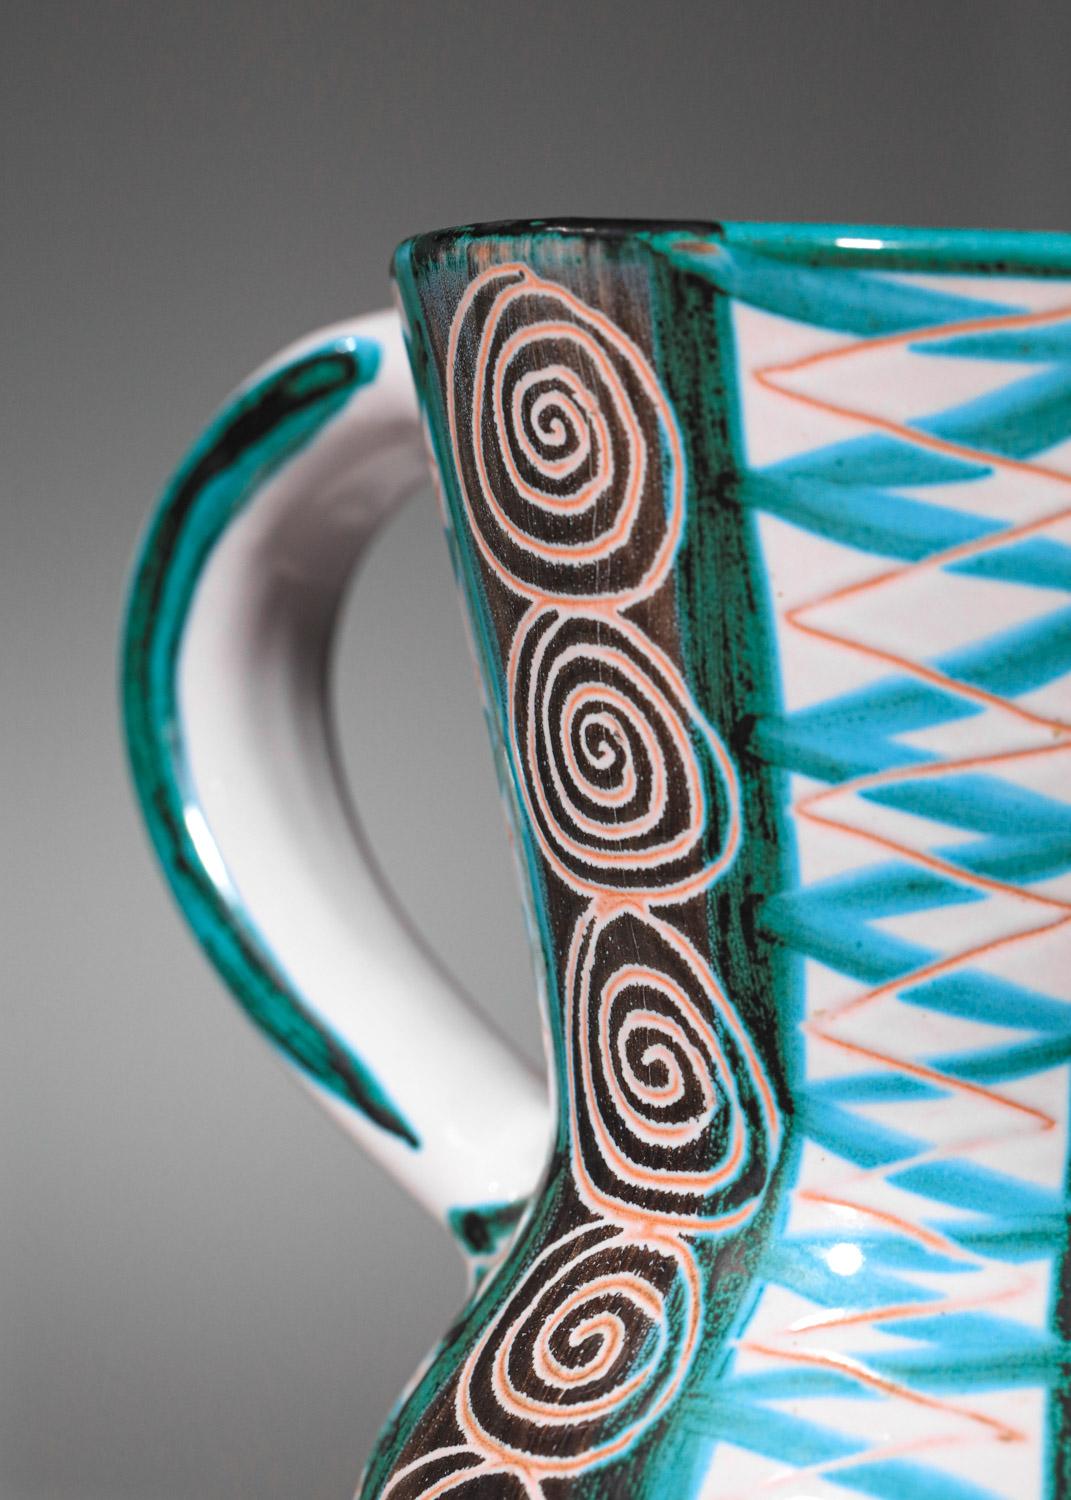 Ceramic vase from the 1960s by French artist Robert Picault from Vallauris. The ceramic is glazed in shades of blue, green and white, with geometric decoration throughout, typical of the ceramist. Very fine vintage condition, signed by the artist